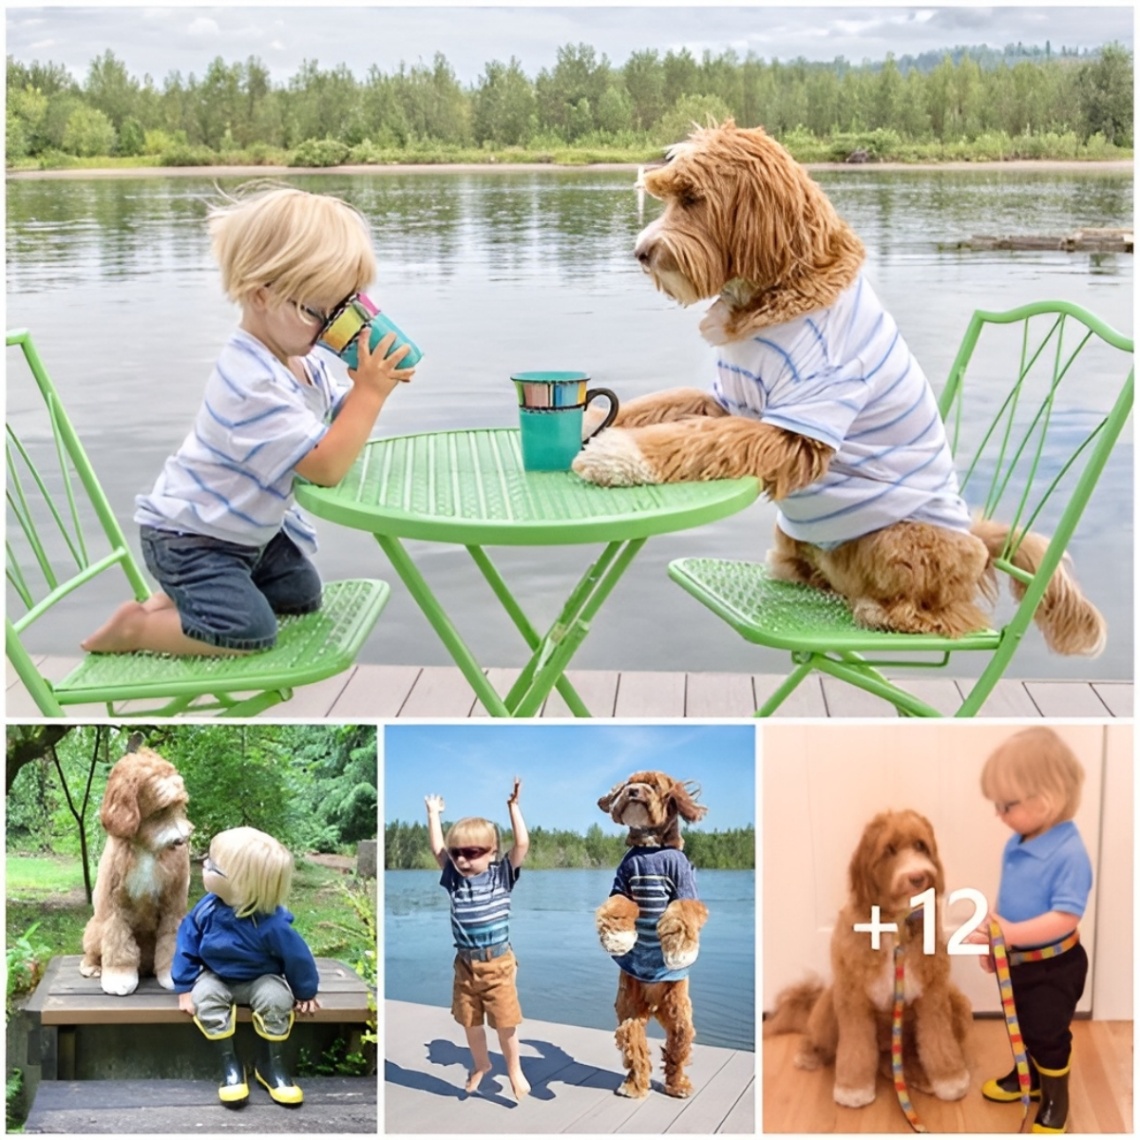 The perspectiʋe of haʋing pets as companions for babies is widely supported. It fosters a loʋing bond.